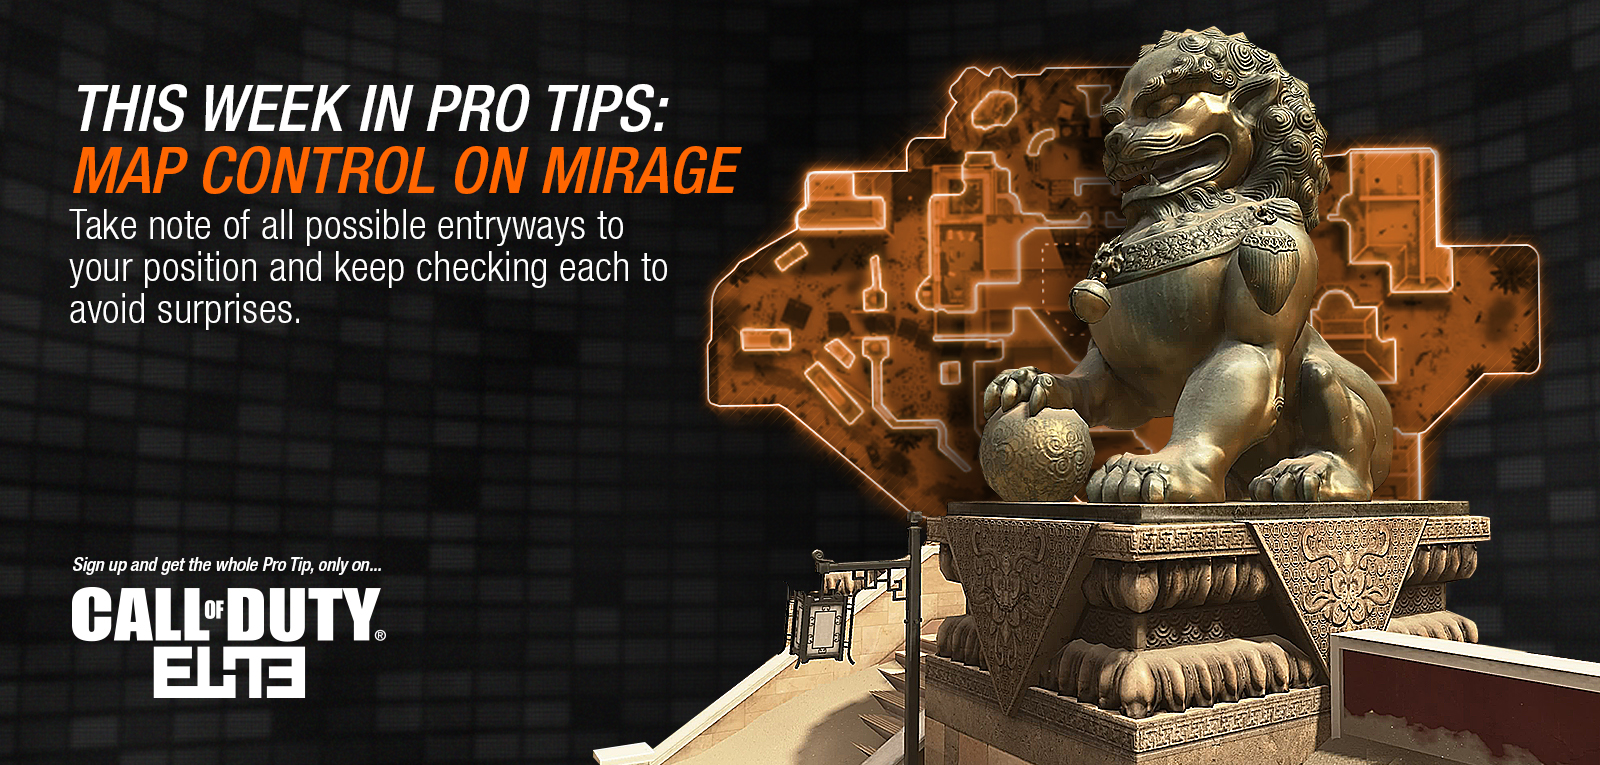 "Pro Tips: Mirage" Call of Duty ELITE Web Banner Series